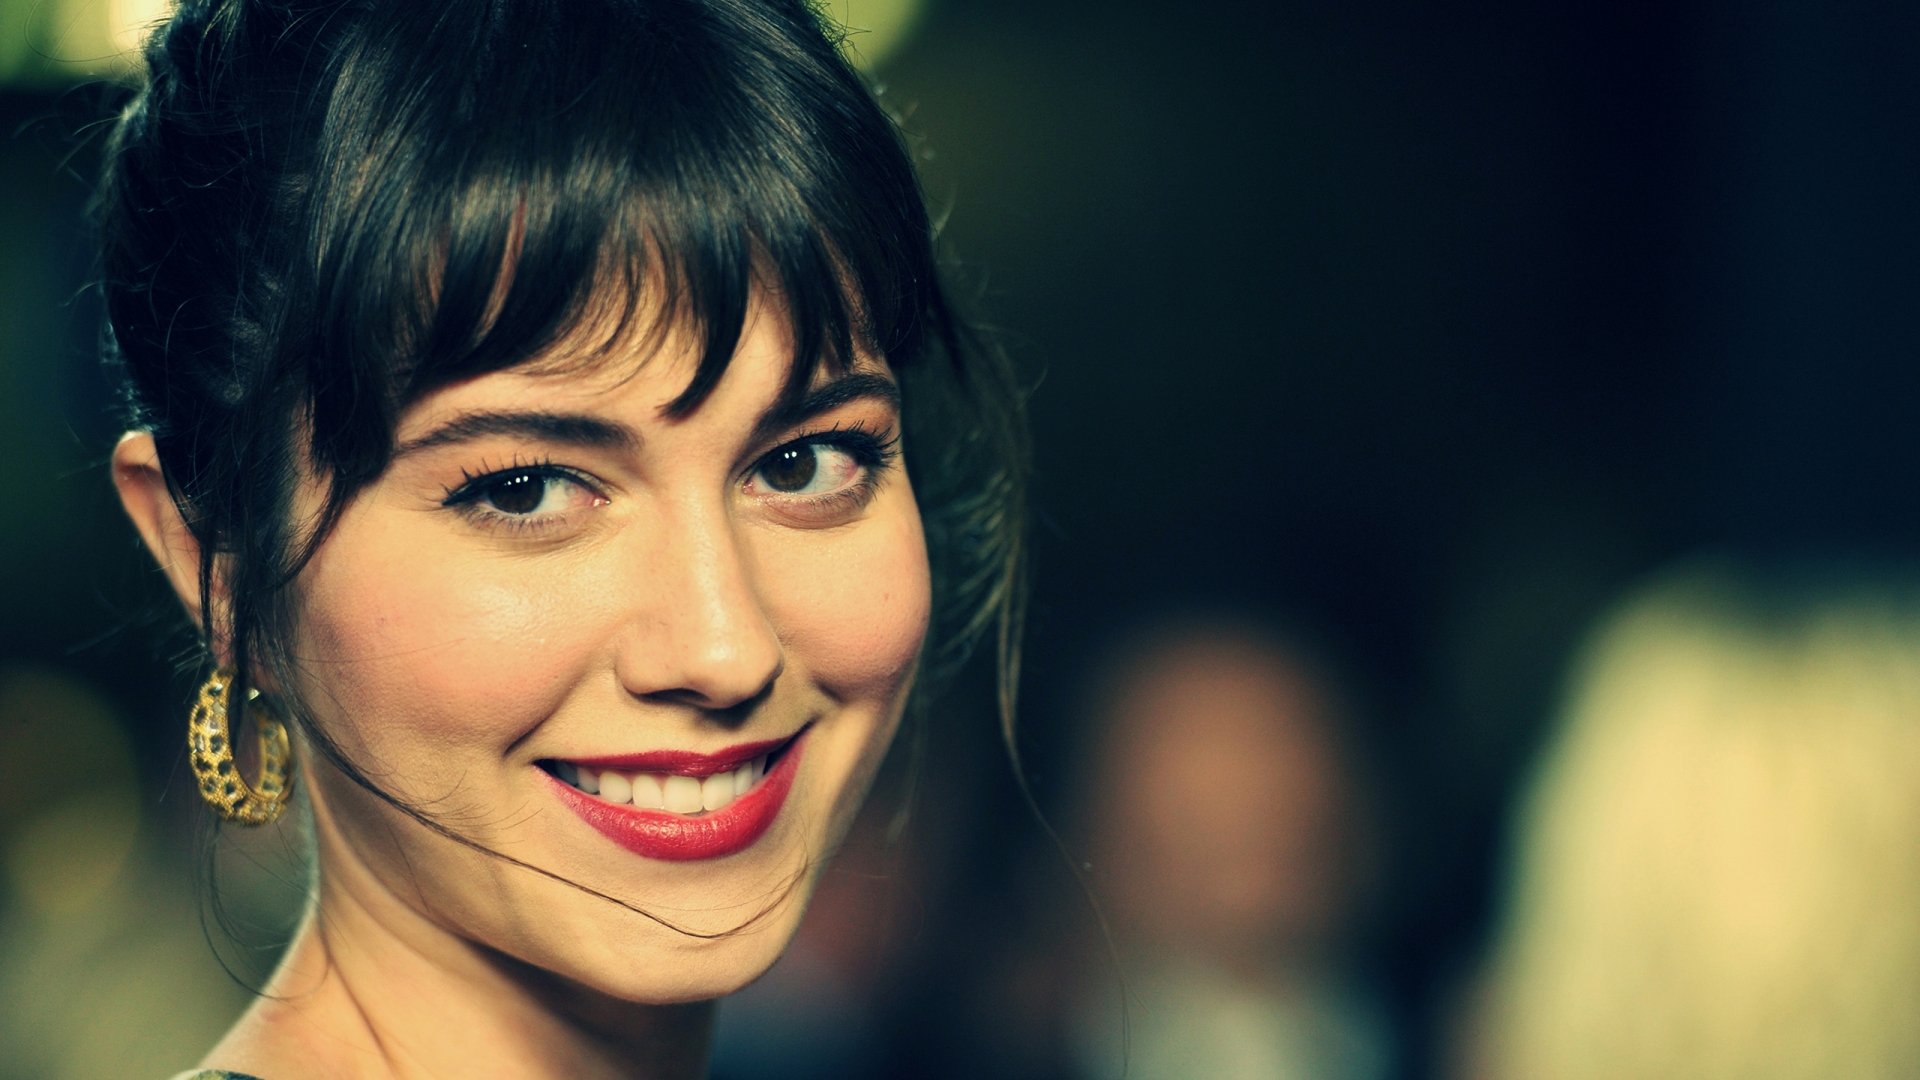 So get your Mary Elizabeth Winstead HD Wallpapers and display it. We have collection of 1920×1080 and different sizes.